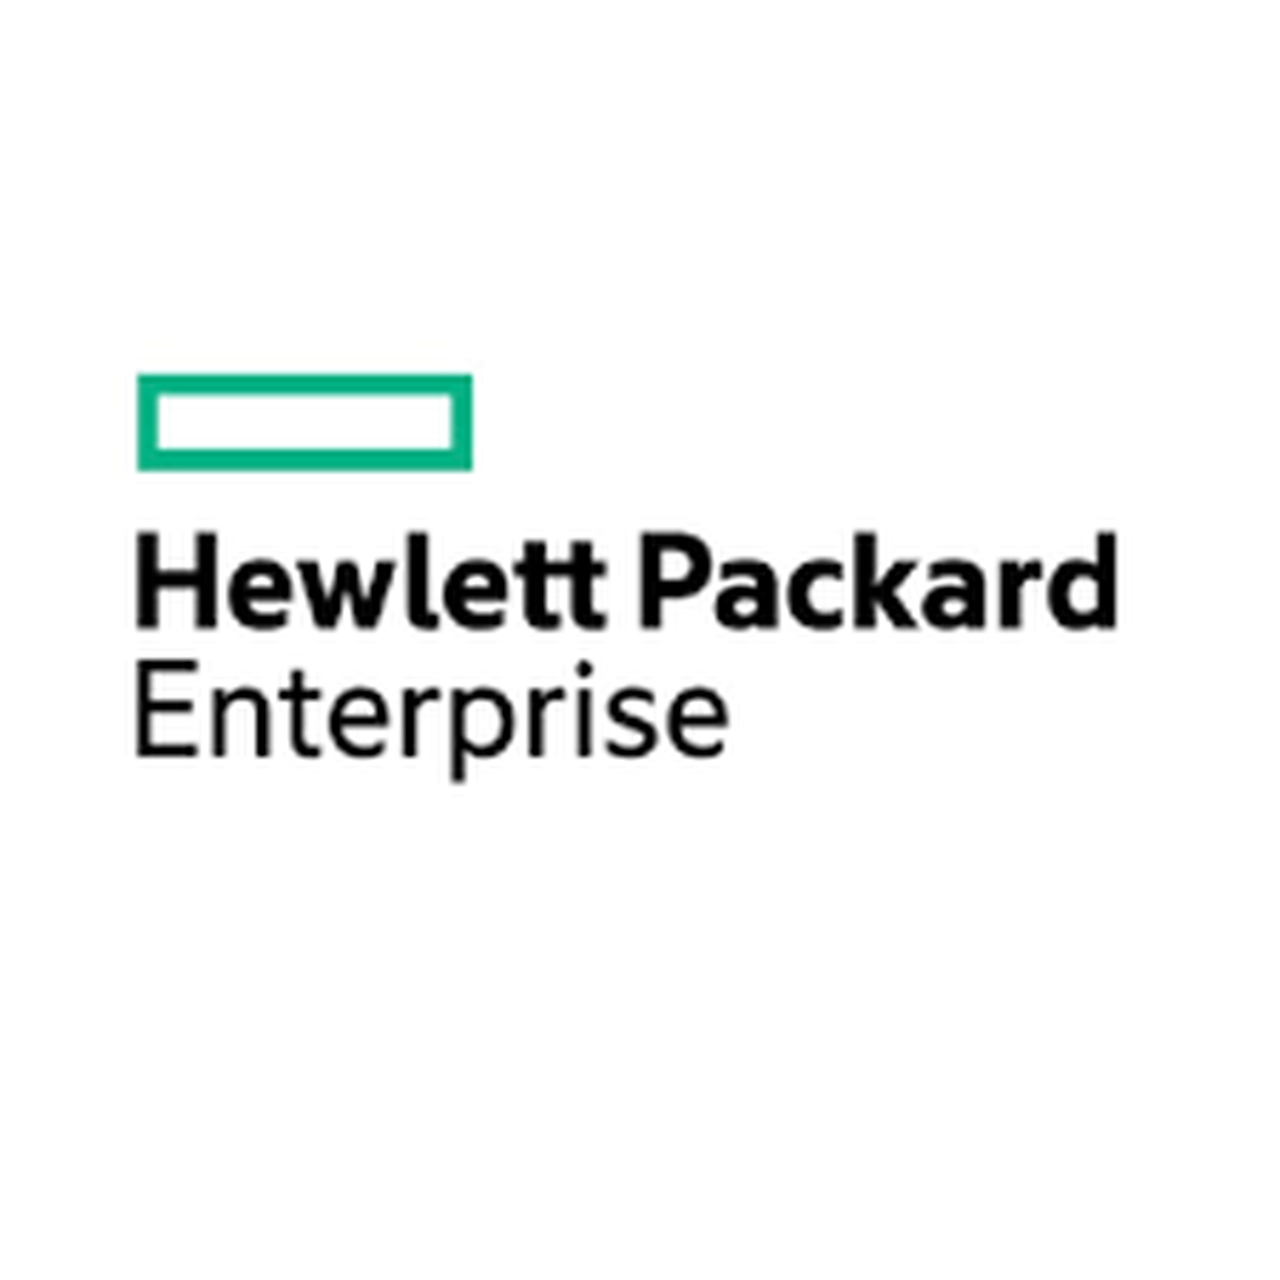 HPE 2 Years Post Warranty Foundation Care, Next Business Day wDMR BL460c Gen10 Service